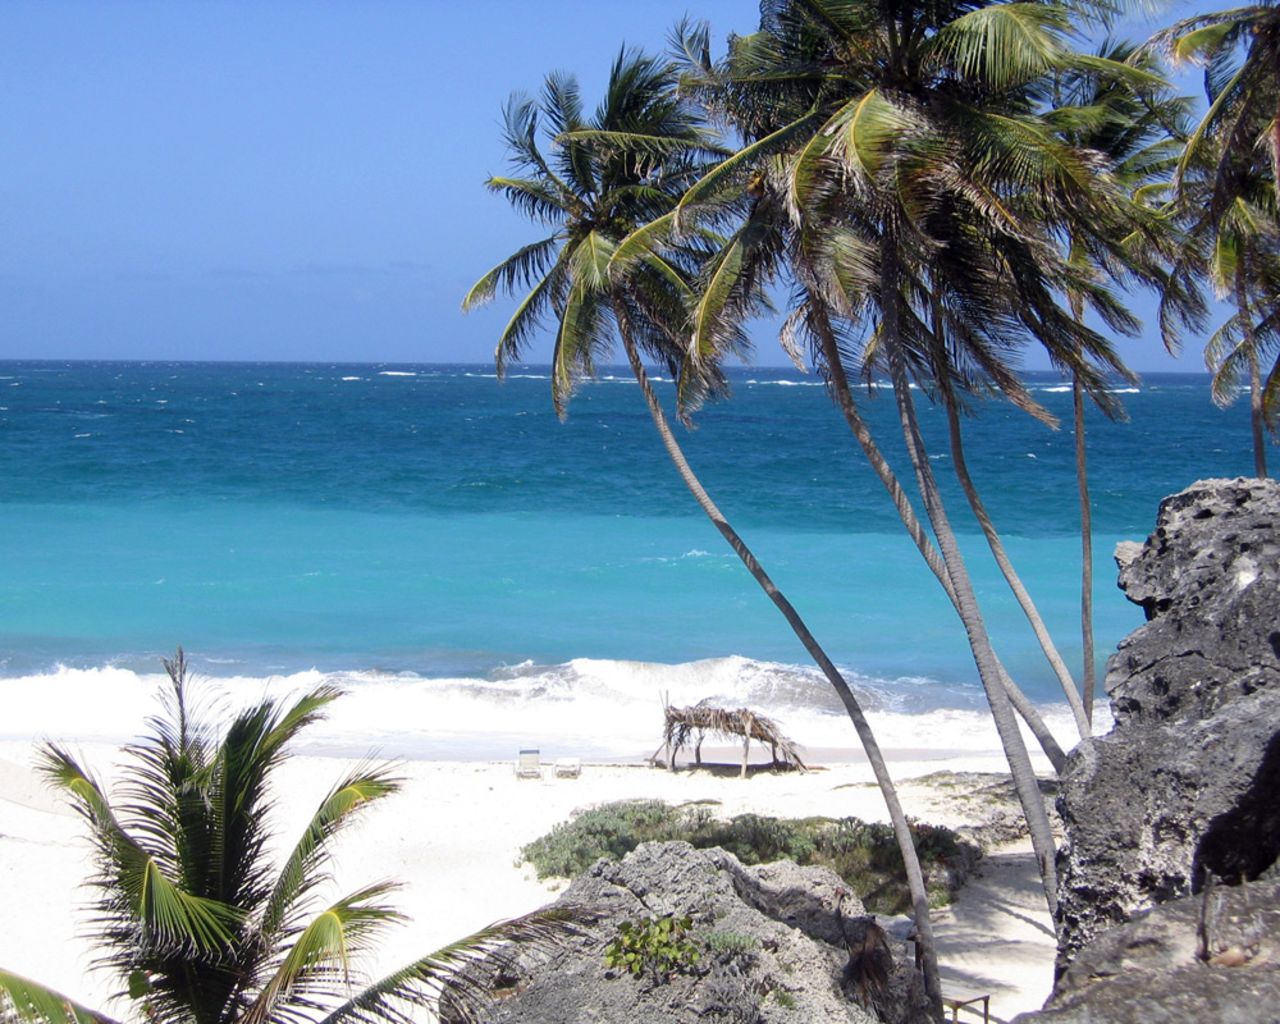 Rum, island cuisine and beaches like this: What's not to like in Barbados?